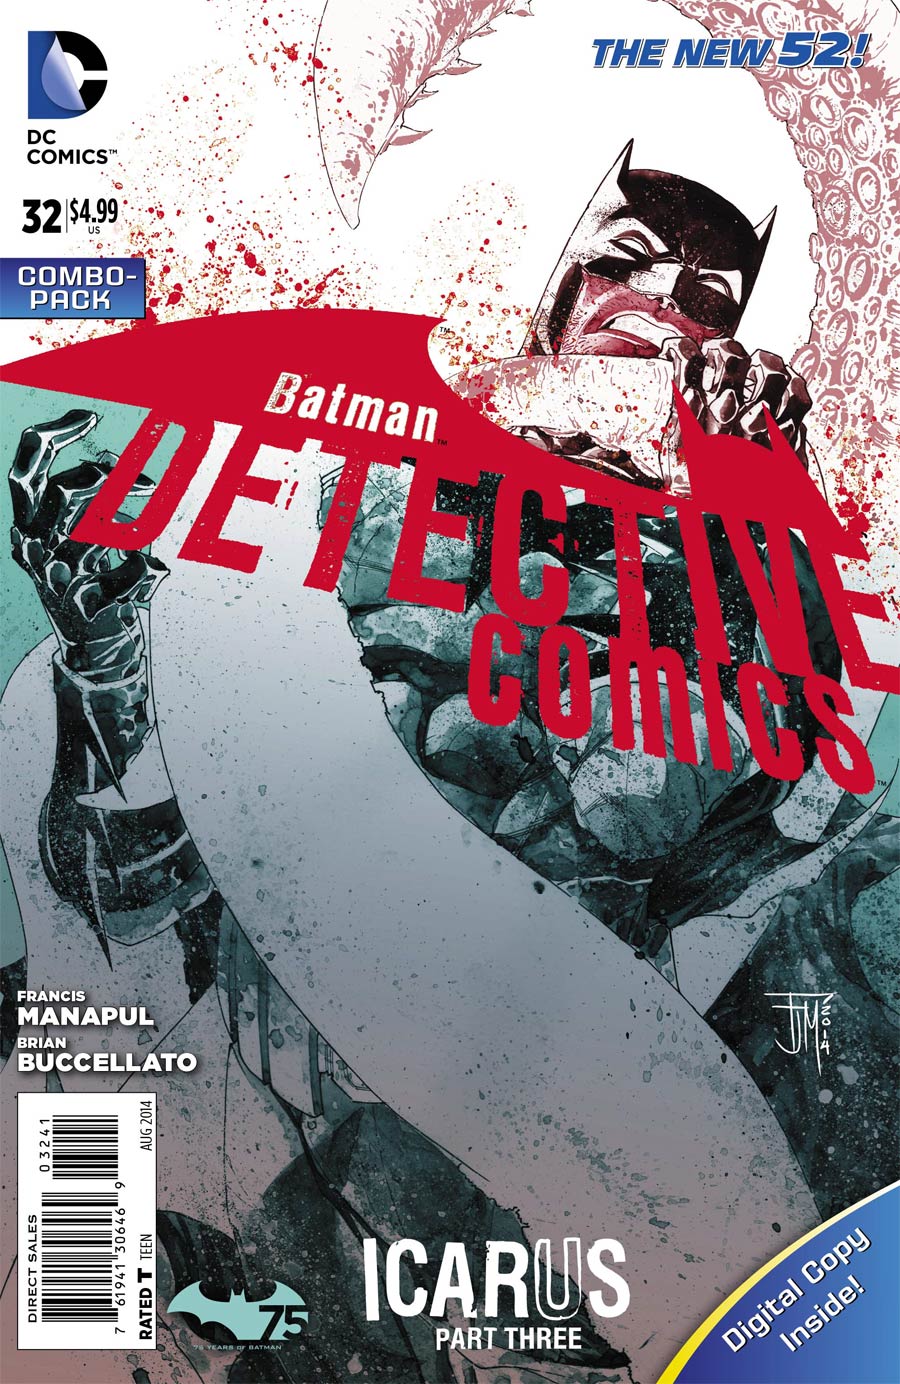 Detective Comics Vol 2 #32 Cover C Combo Pack With Polybag